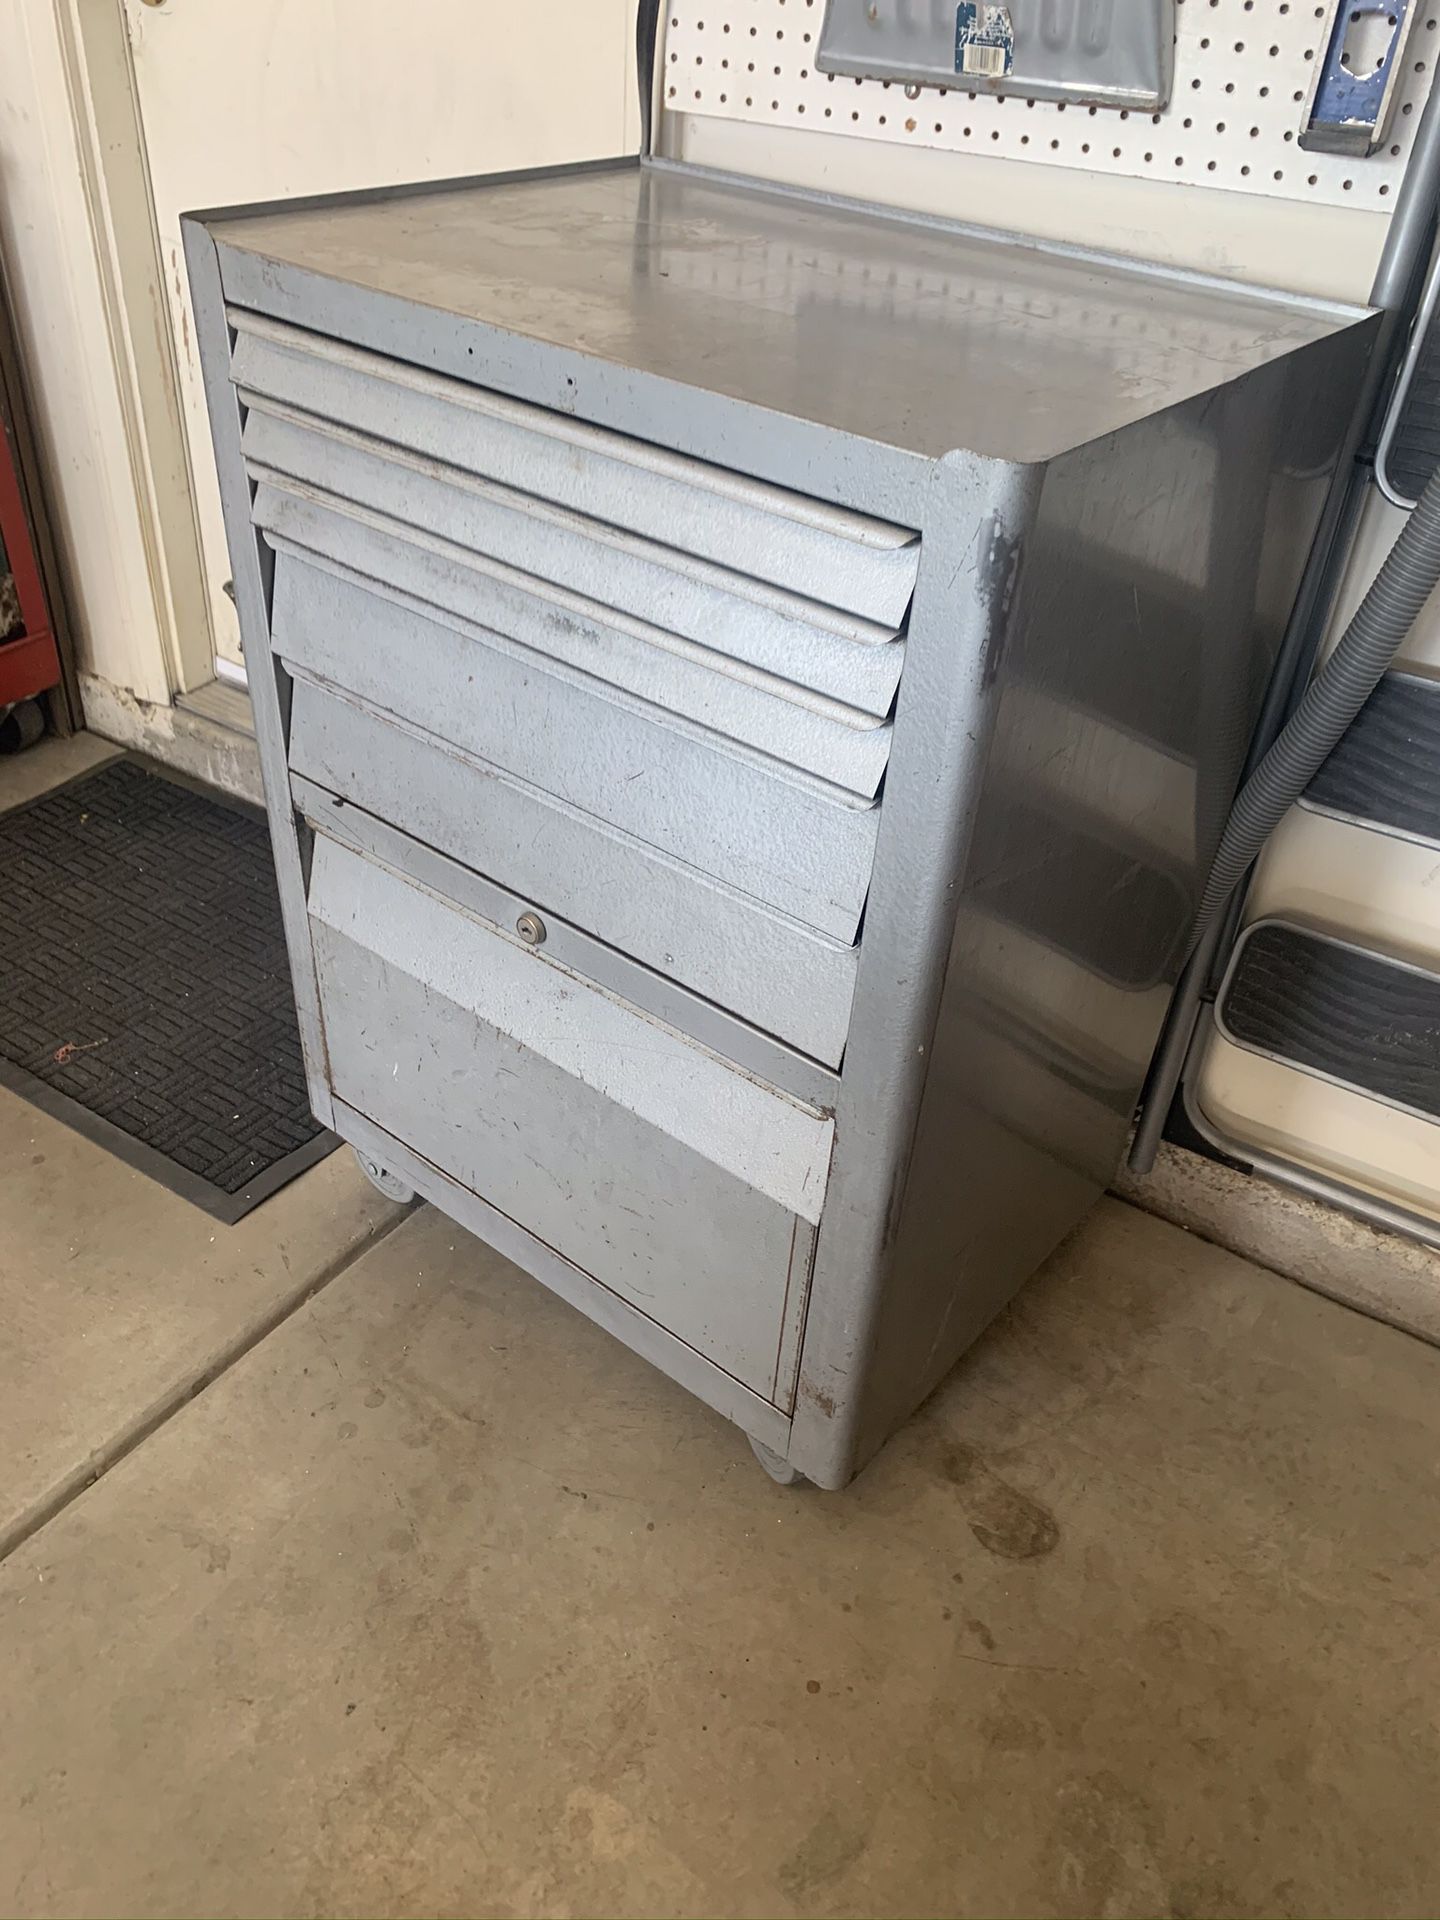 SNAP ON KRA-377A TOOL BOX. SNAPON TOOL CHEST STORAGE CABINET (w-27 Inches H-37 Inches D-19 1/4 Inches) No Key $235.oo